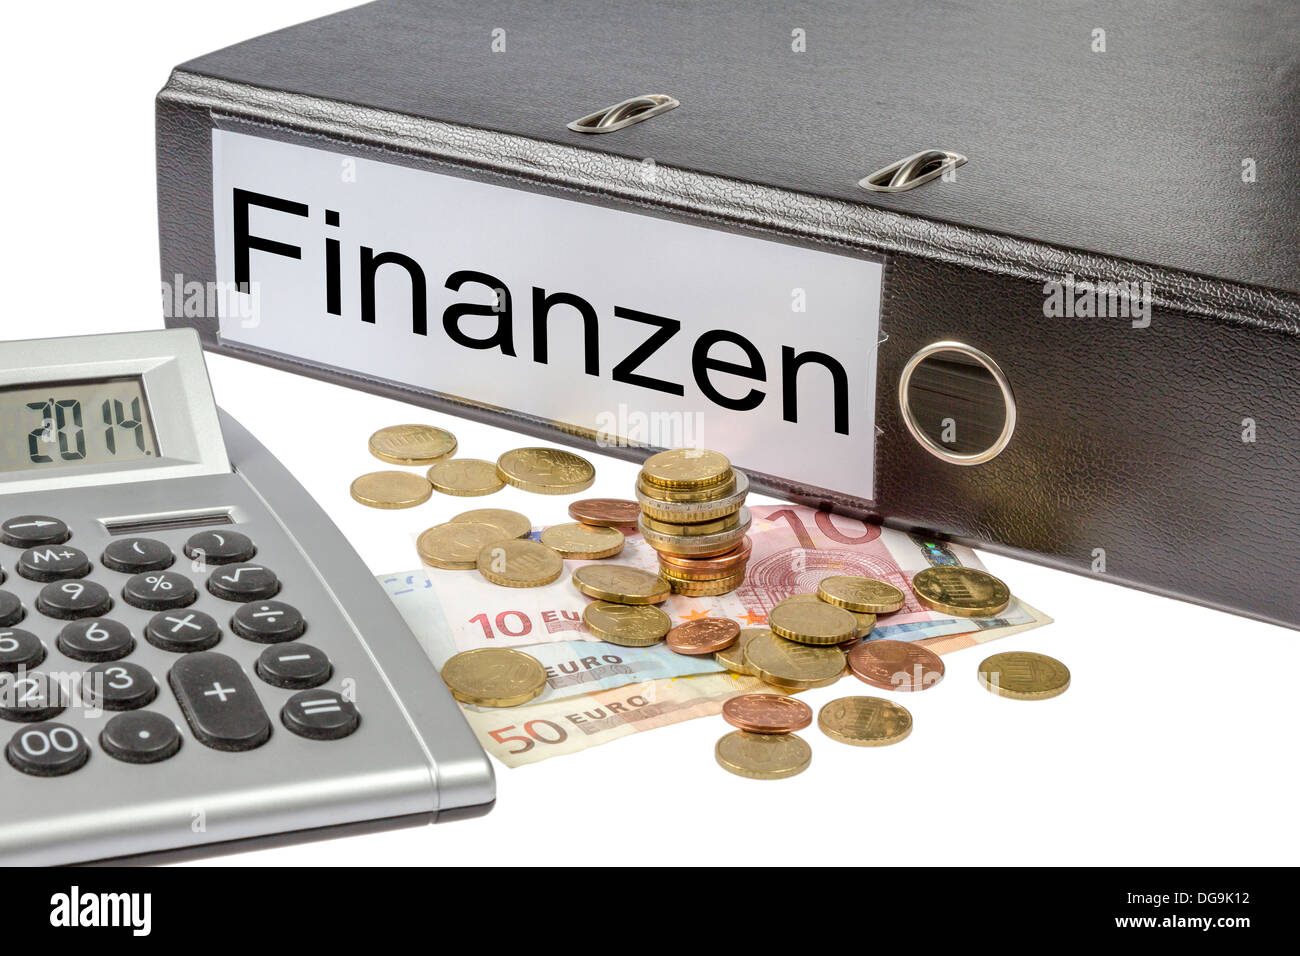 A Binder labeled wit the word Finanzen (German Finances) calculator and european currency isolated on white background Stock Photo